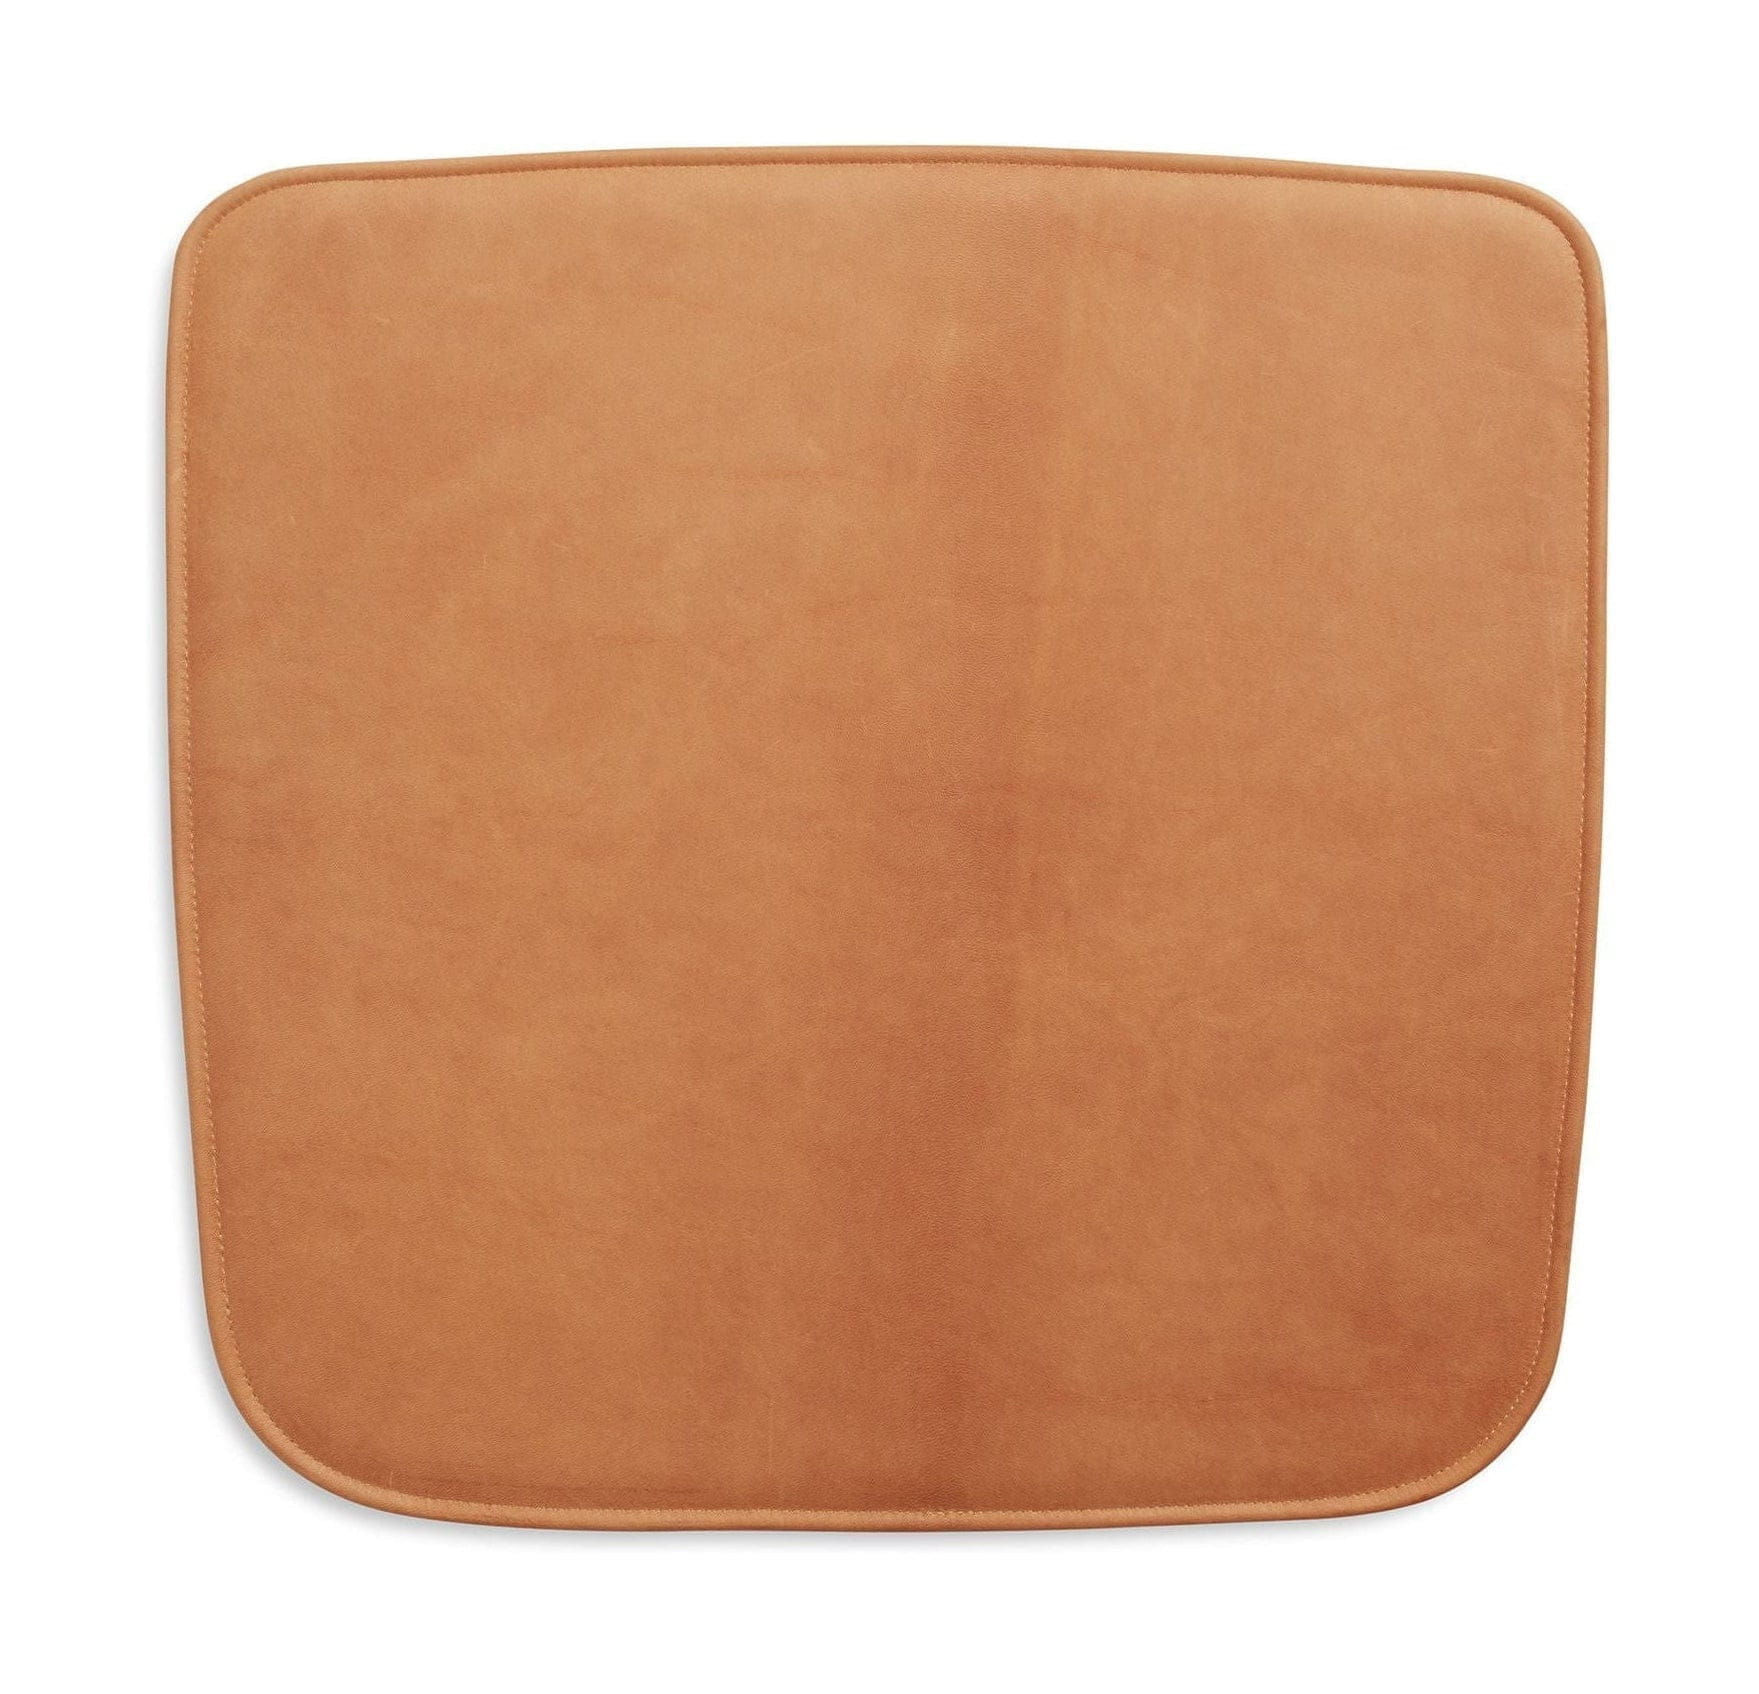 Skagerak Seat Cover For Hven Chair, Cognac